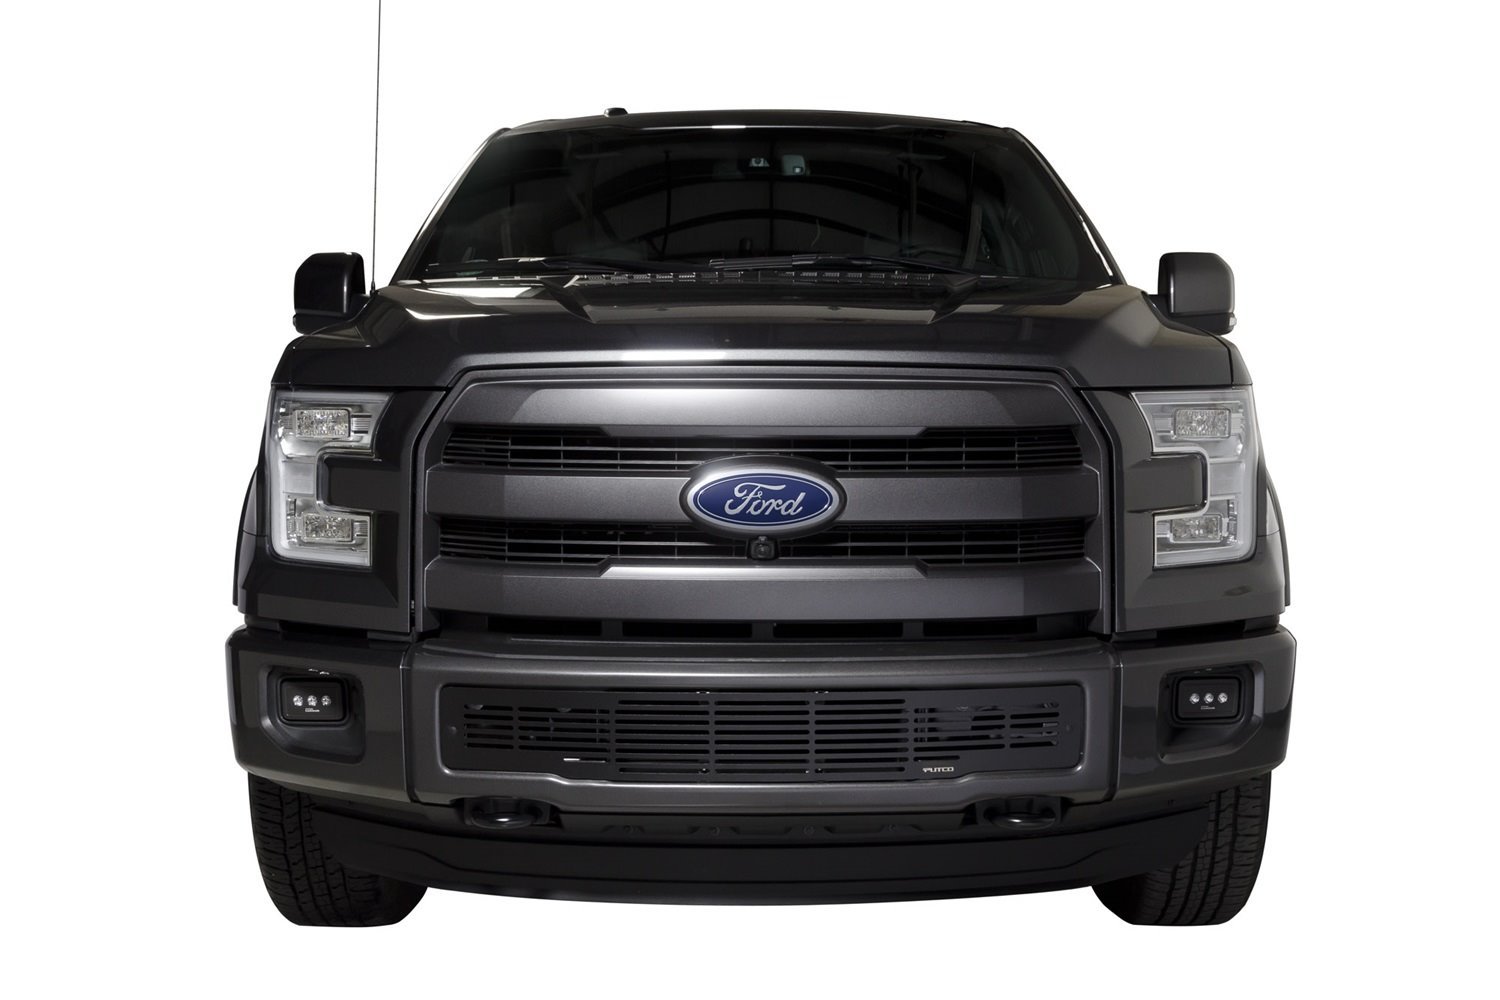 GRILLE Punch GRILLE Ford F150-Stainless Steel Black Bar Design